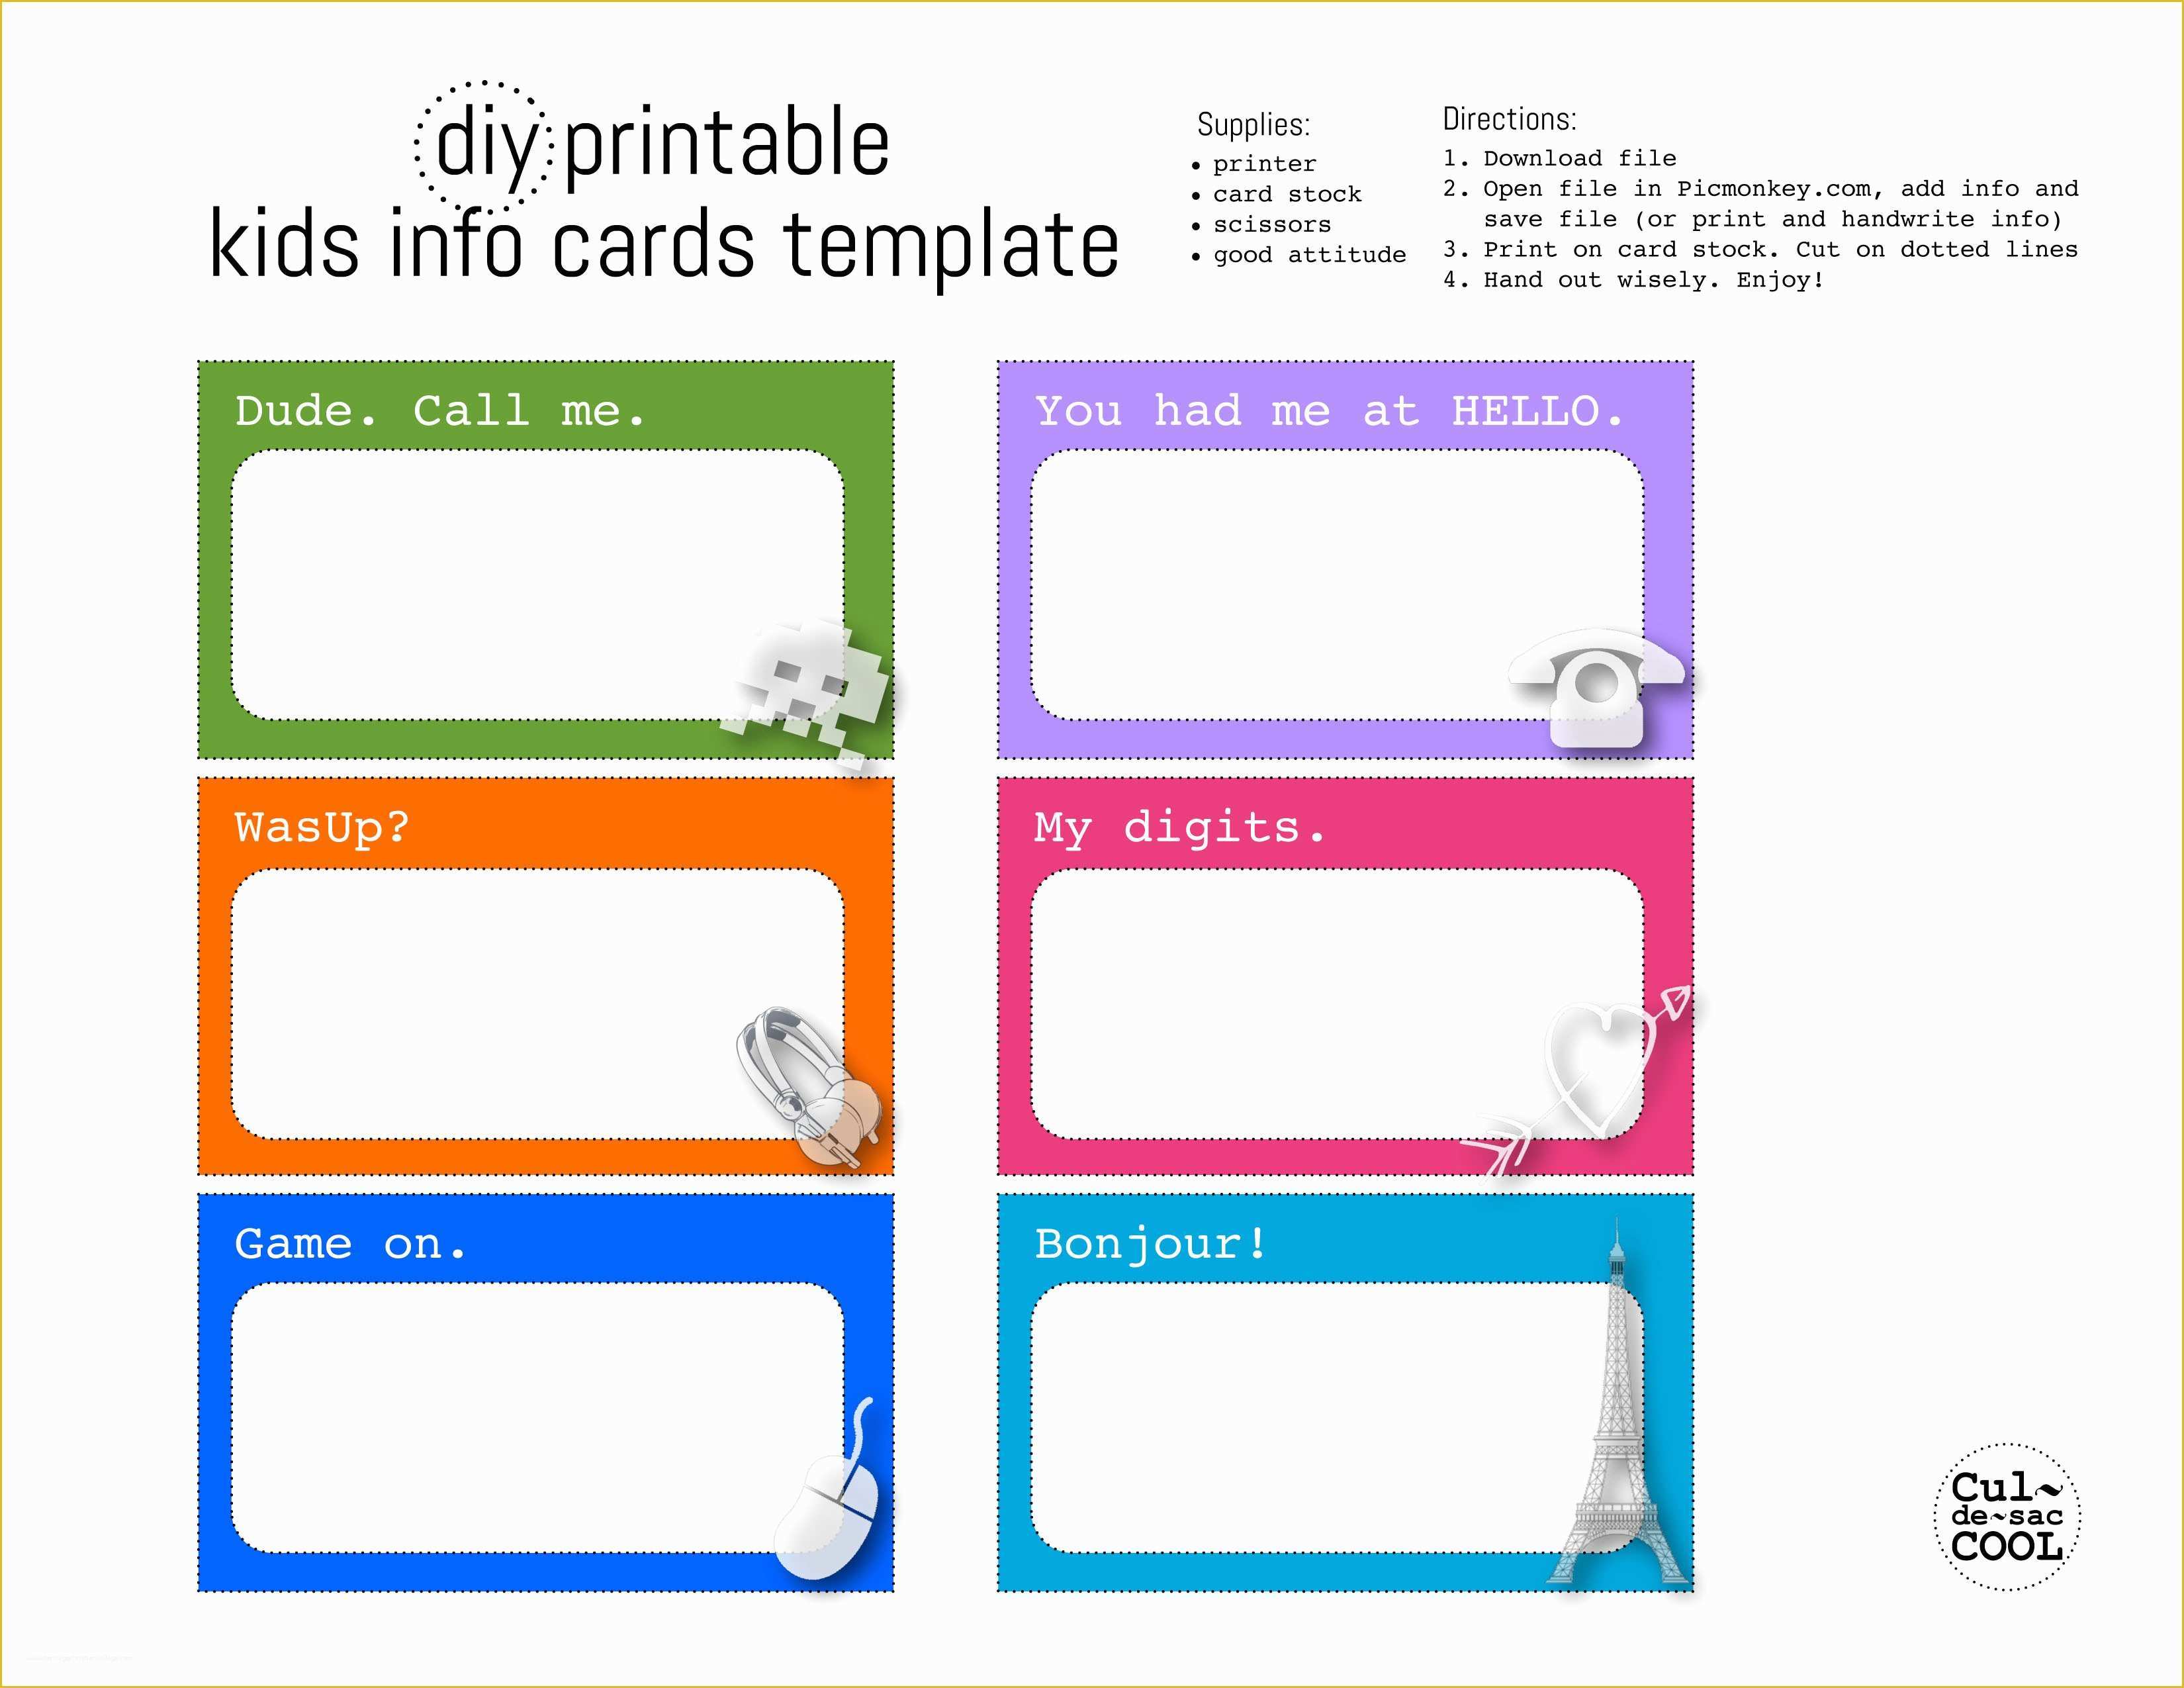 Free Printable Business Card Templates for Word Of Diy Printable Kids Info Cards Template